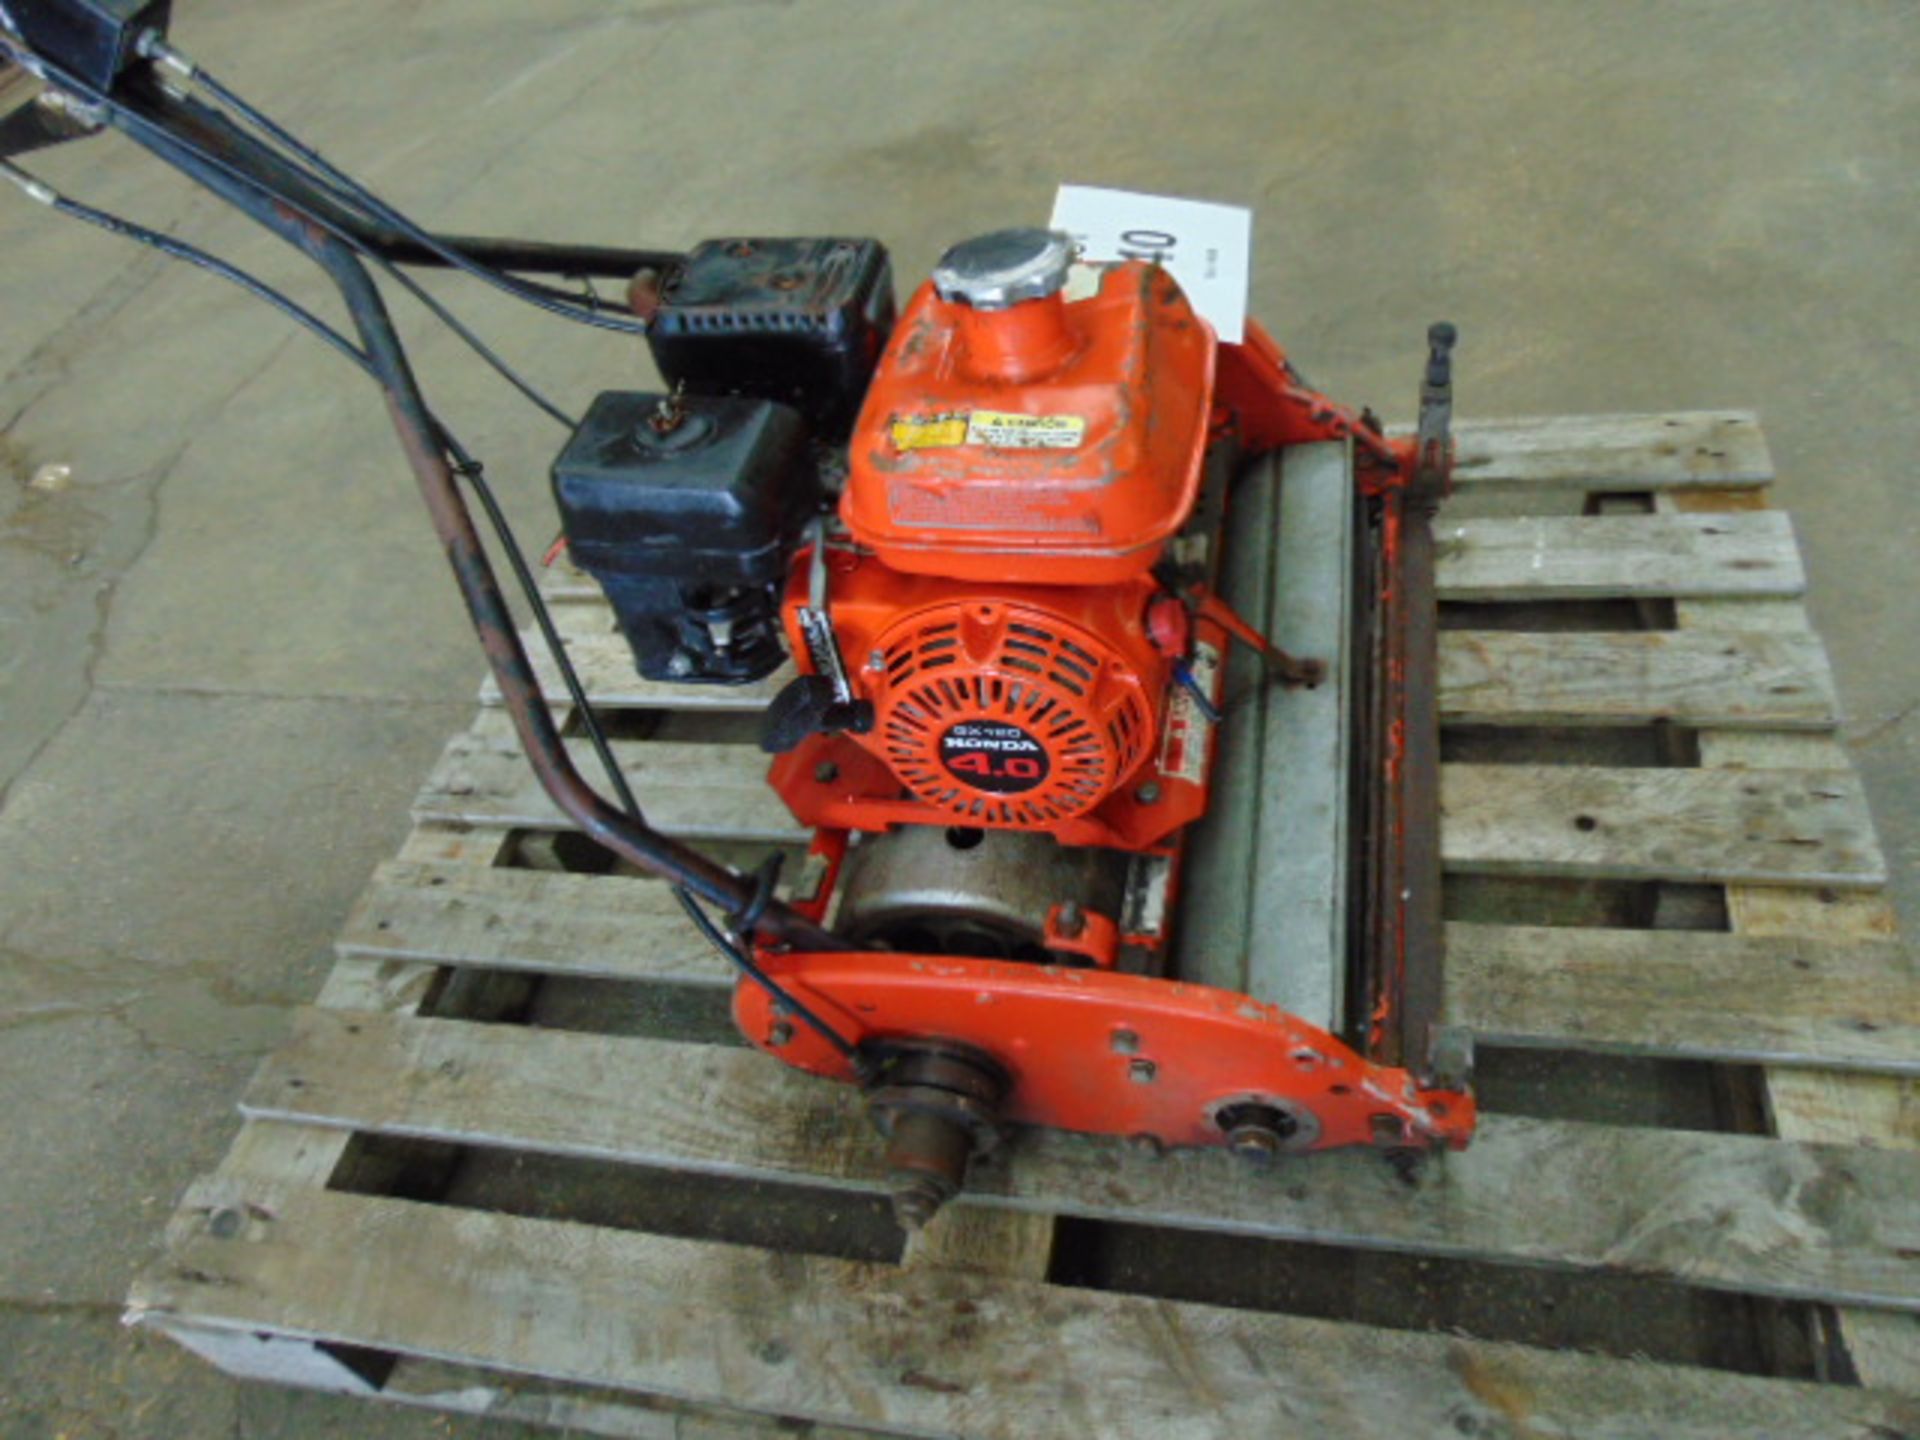 JACOBSEN 26 INCH CUT PROFFESSIONAL CYLINDER MOWER WITH 4 HP GX 120 ENGINE - Image 6 of 8